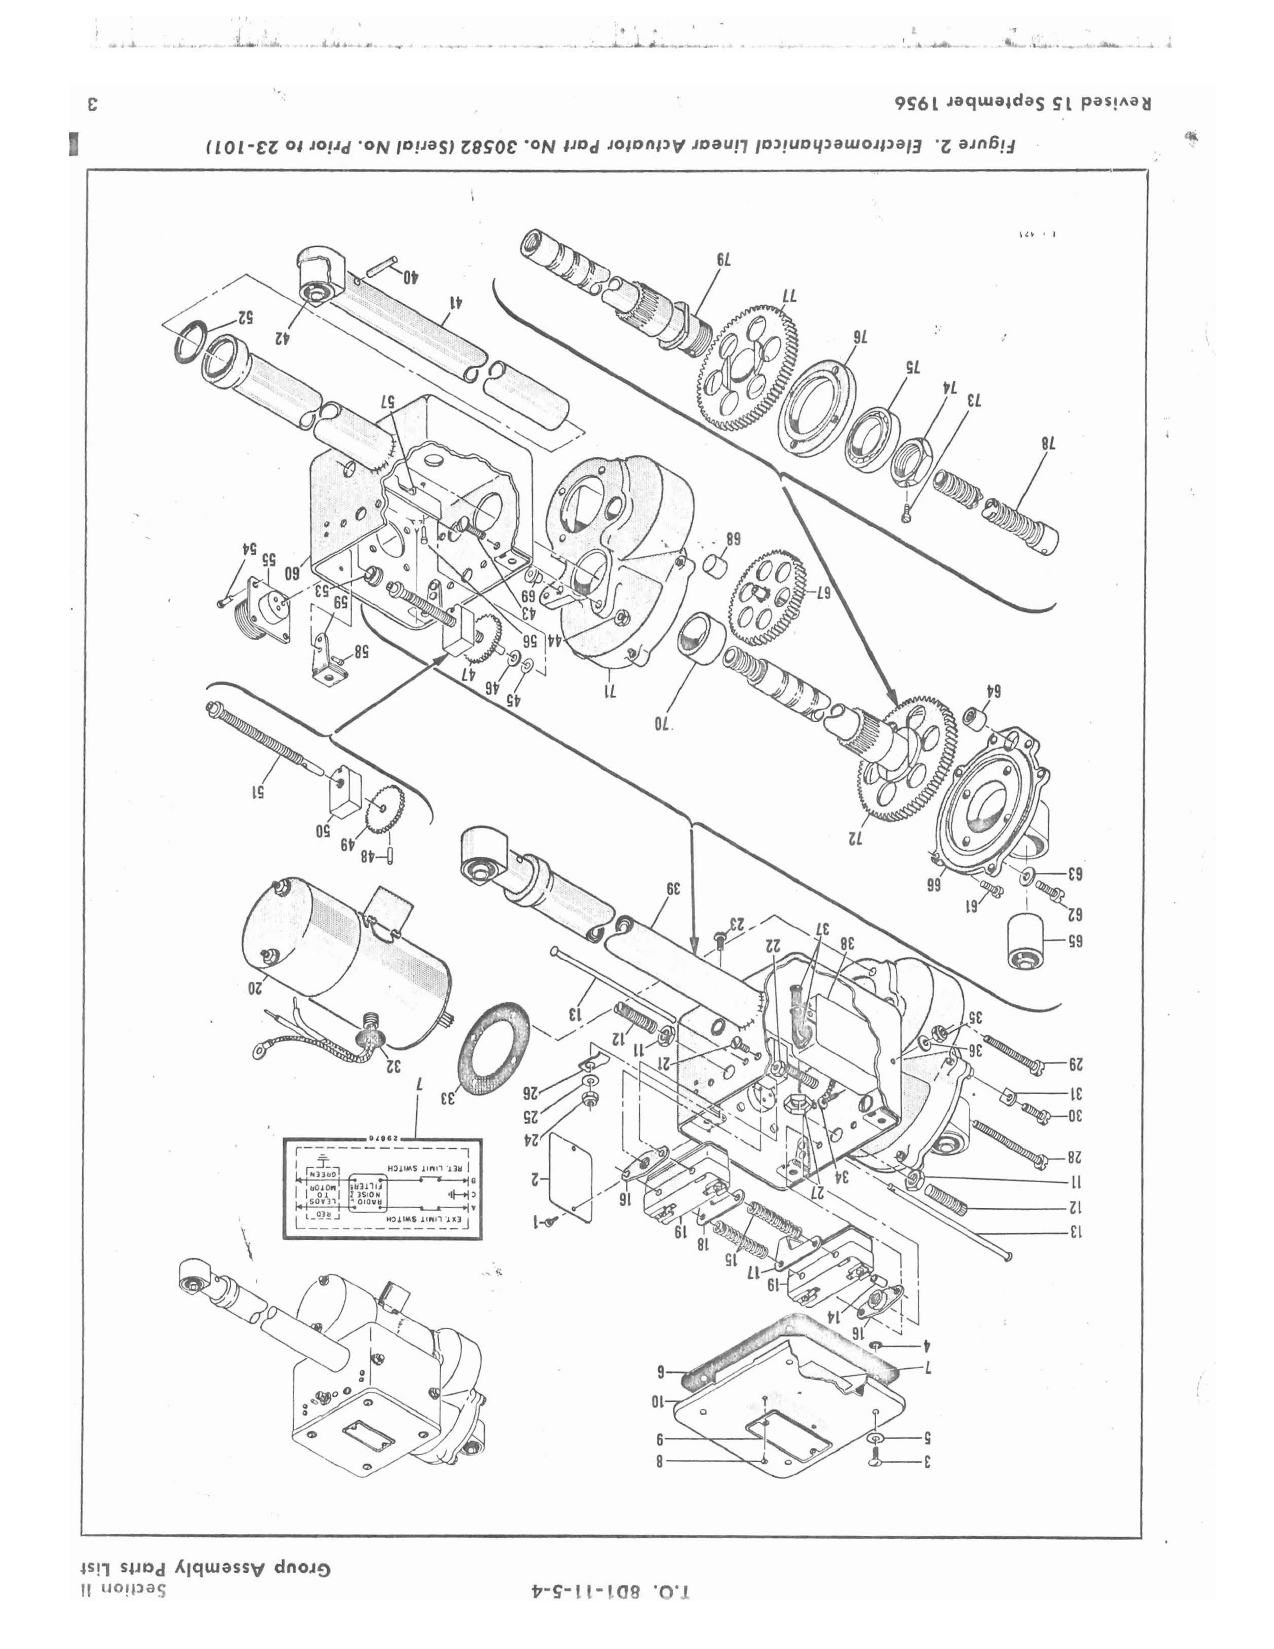 Sample page 5 from AirCorps Library document: Illustrated Parts Breakdown for Electromechanical Linear Actuators - Parts 30582, 31534, 31584 - Model ELA8-43 and ELA8-44